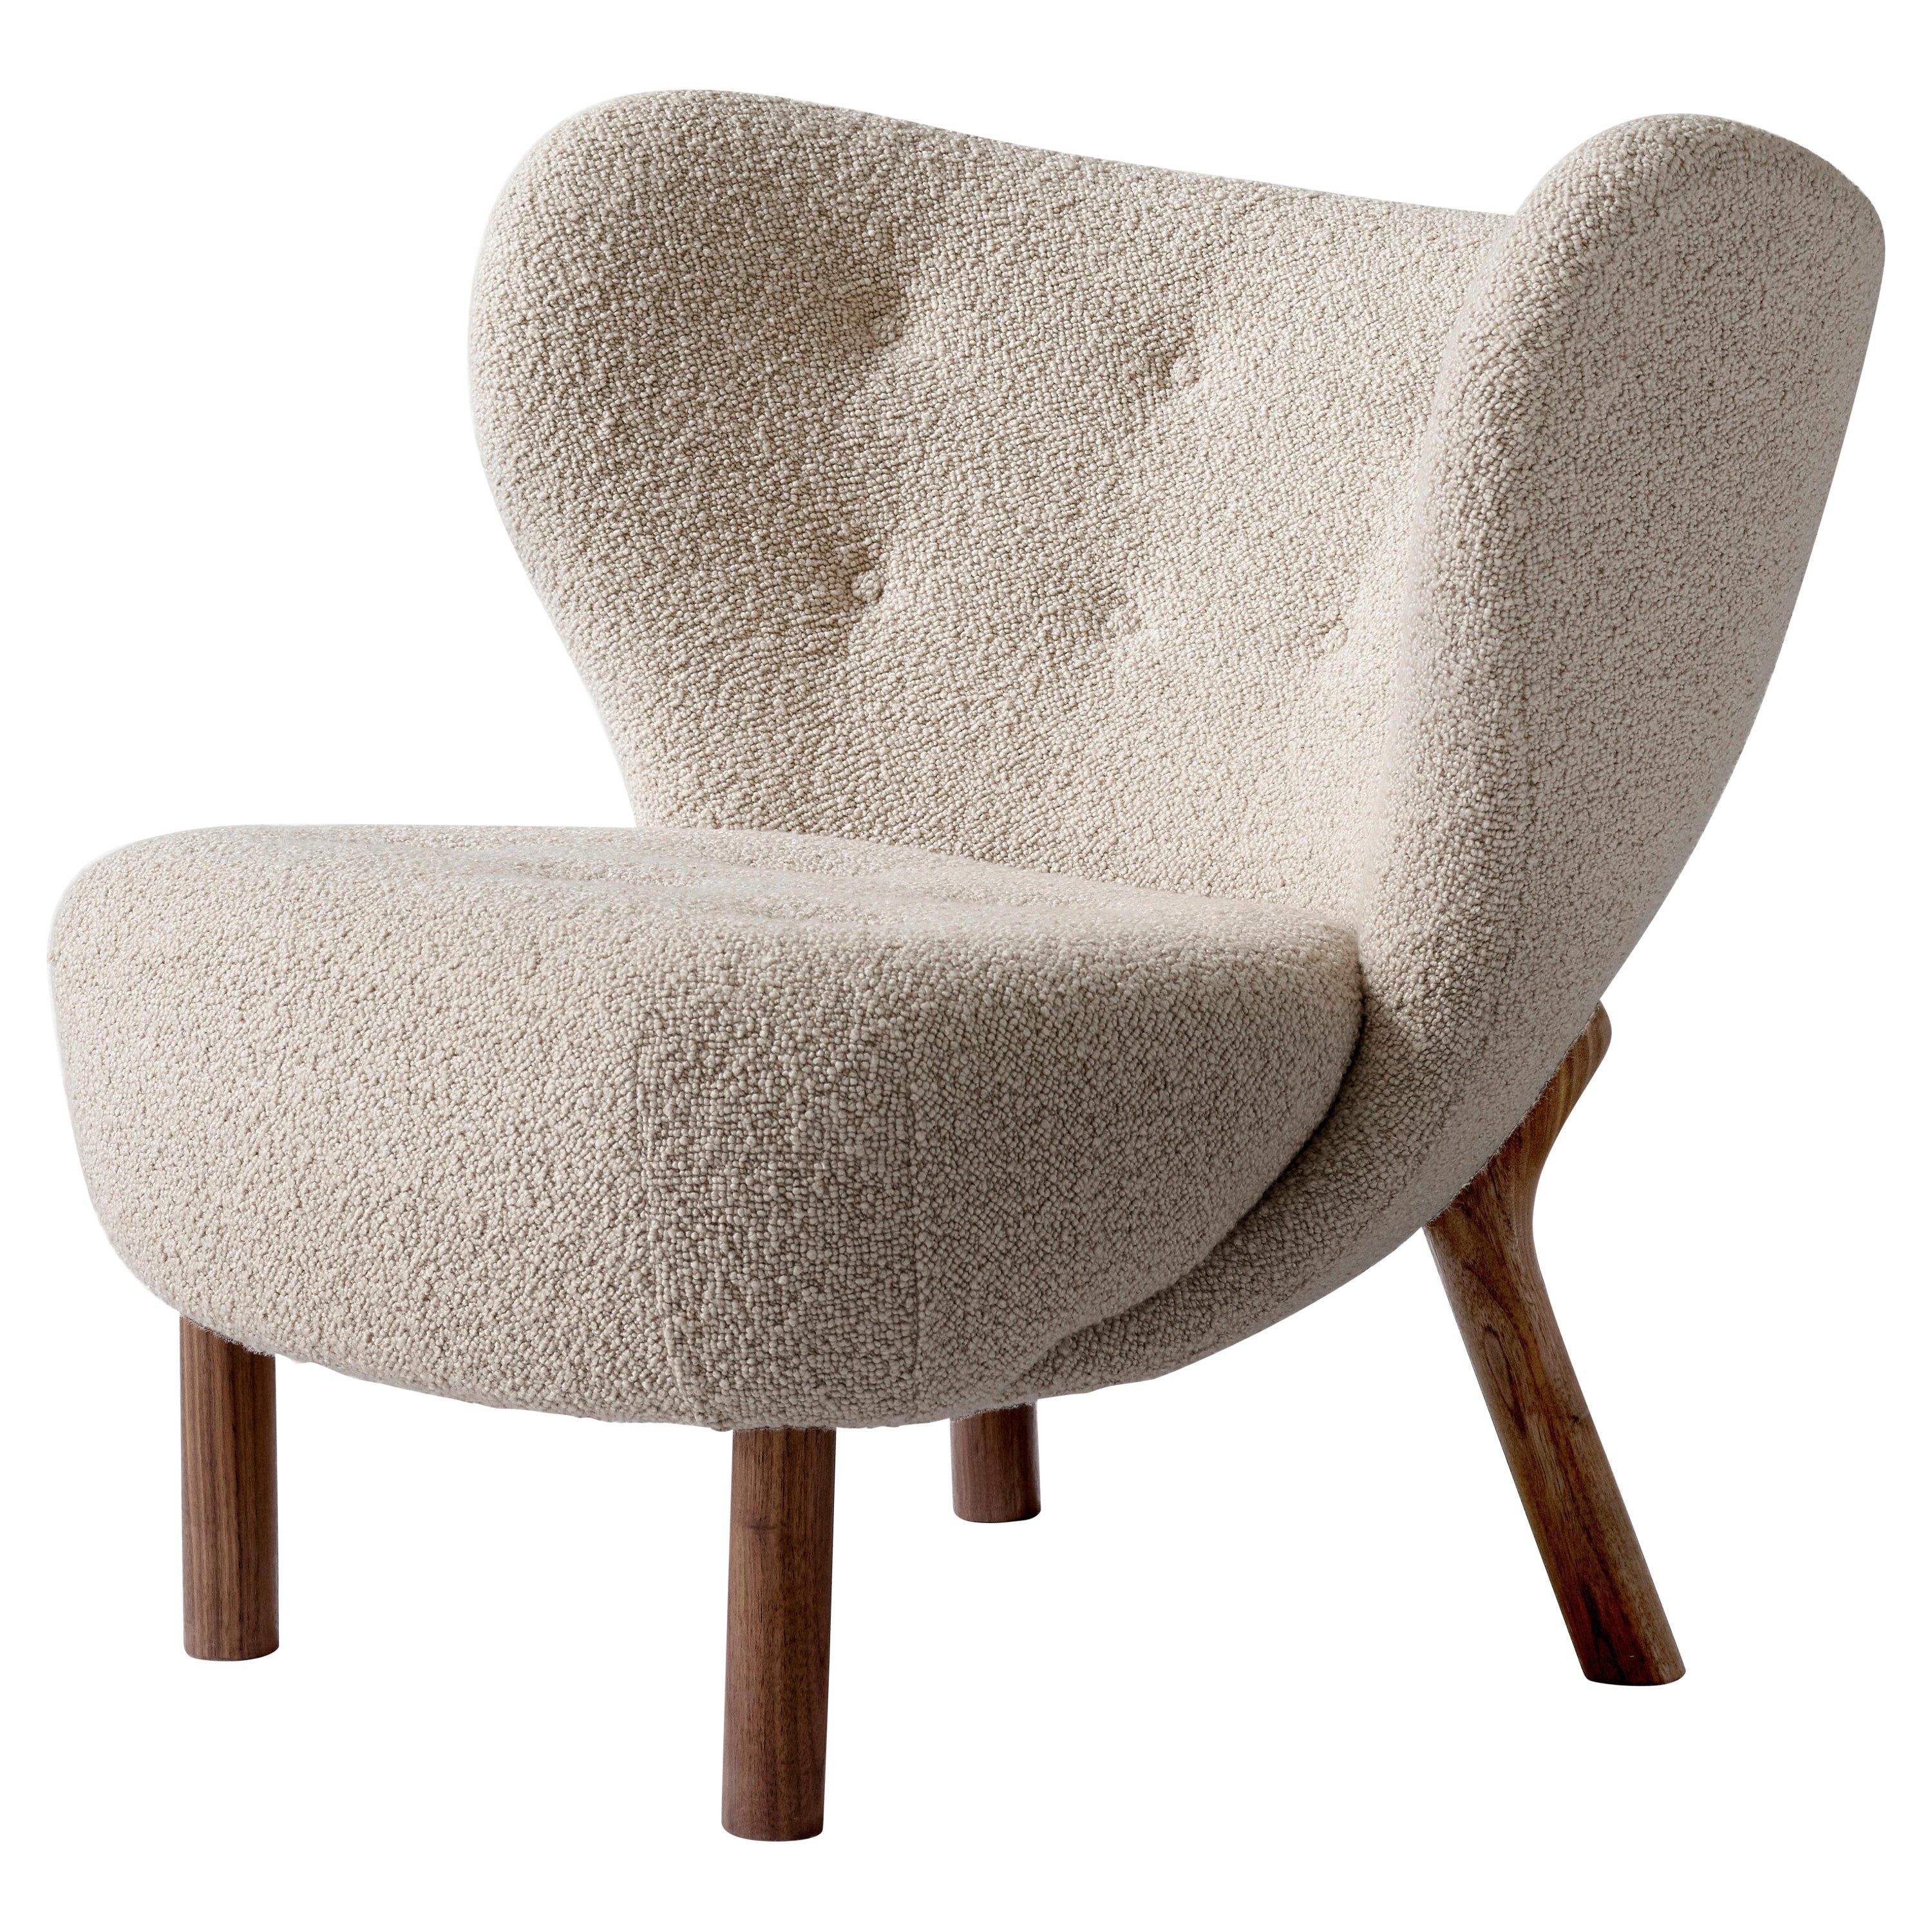 Little Petra VB1 Lounge Chair in Walnut & C.O.M 'Customer's Own Material' for &T | 1stDibs